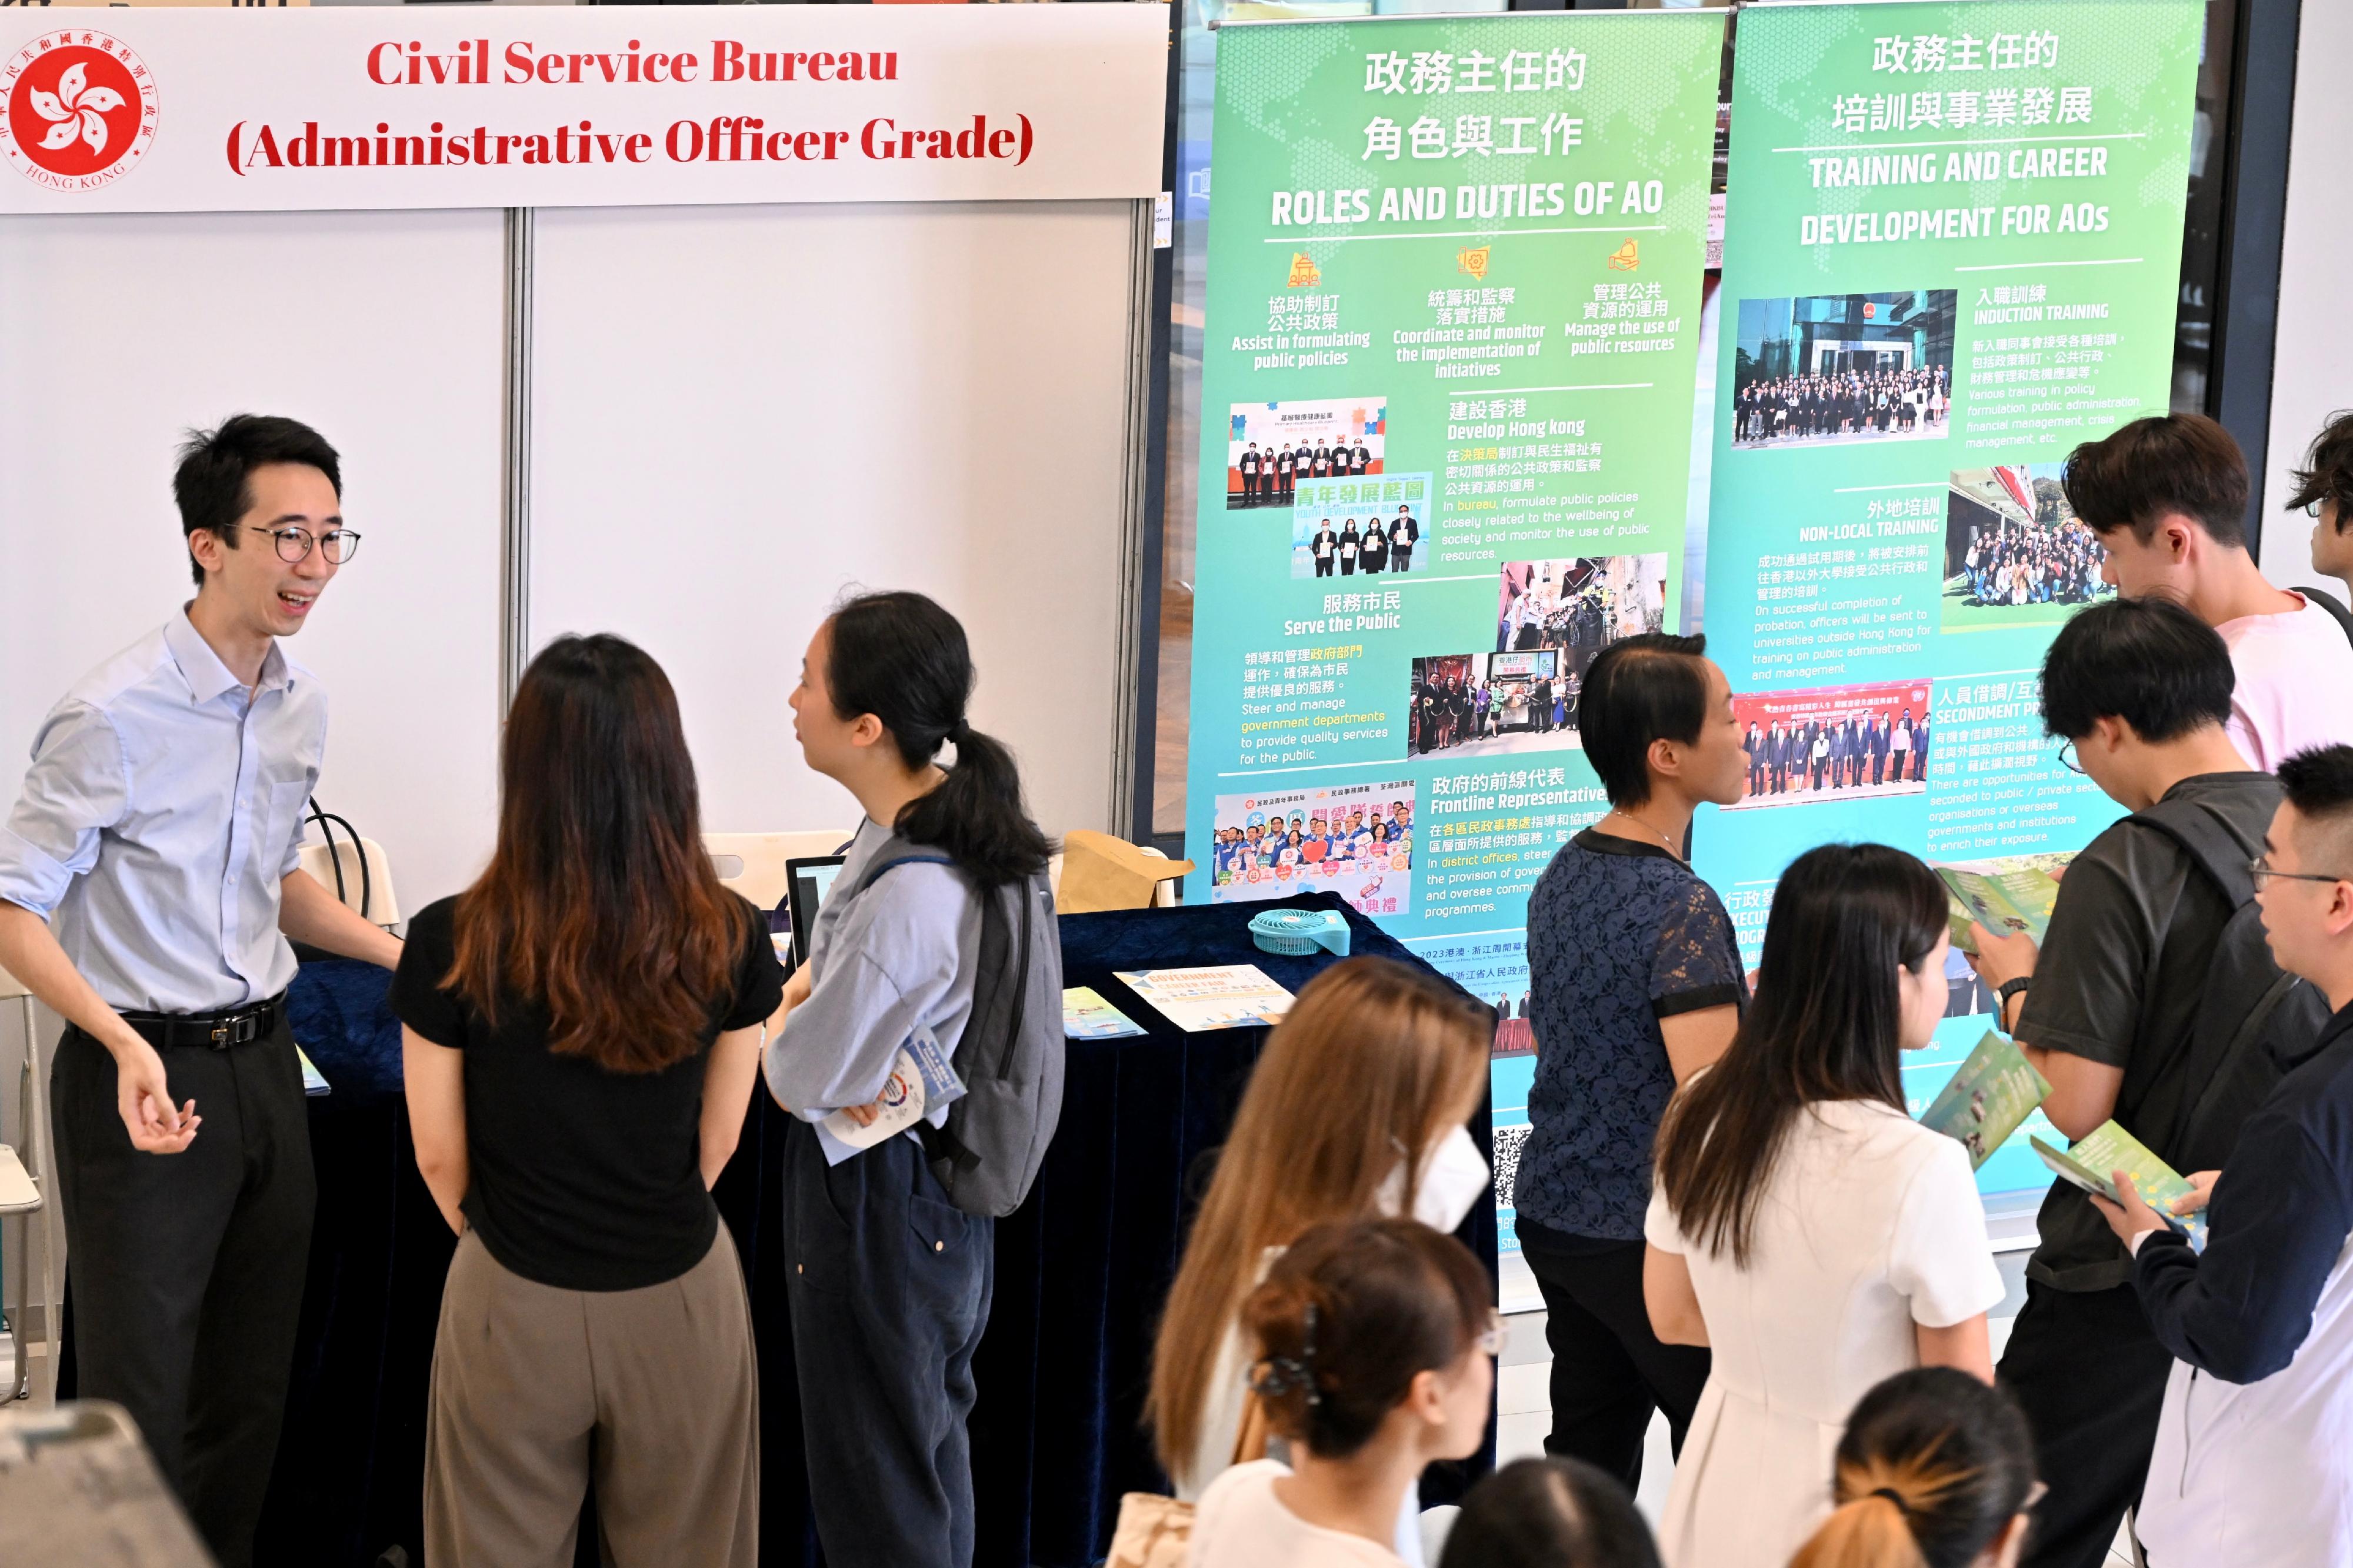 Hong Kong Baptist University held a Government Career Fair at its campus today (September 20) to introduce to students the work and recruitment arrangements of 47 grades to let them learn more about the employment opportunities offered by different grades to young people. Photo shows students visiting the booth set up by the Civil Service Bureau and  being briefed by staff on the Administrative Officer Grade.